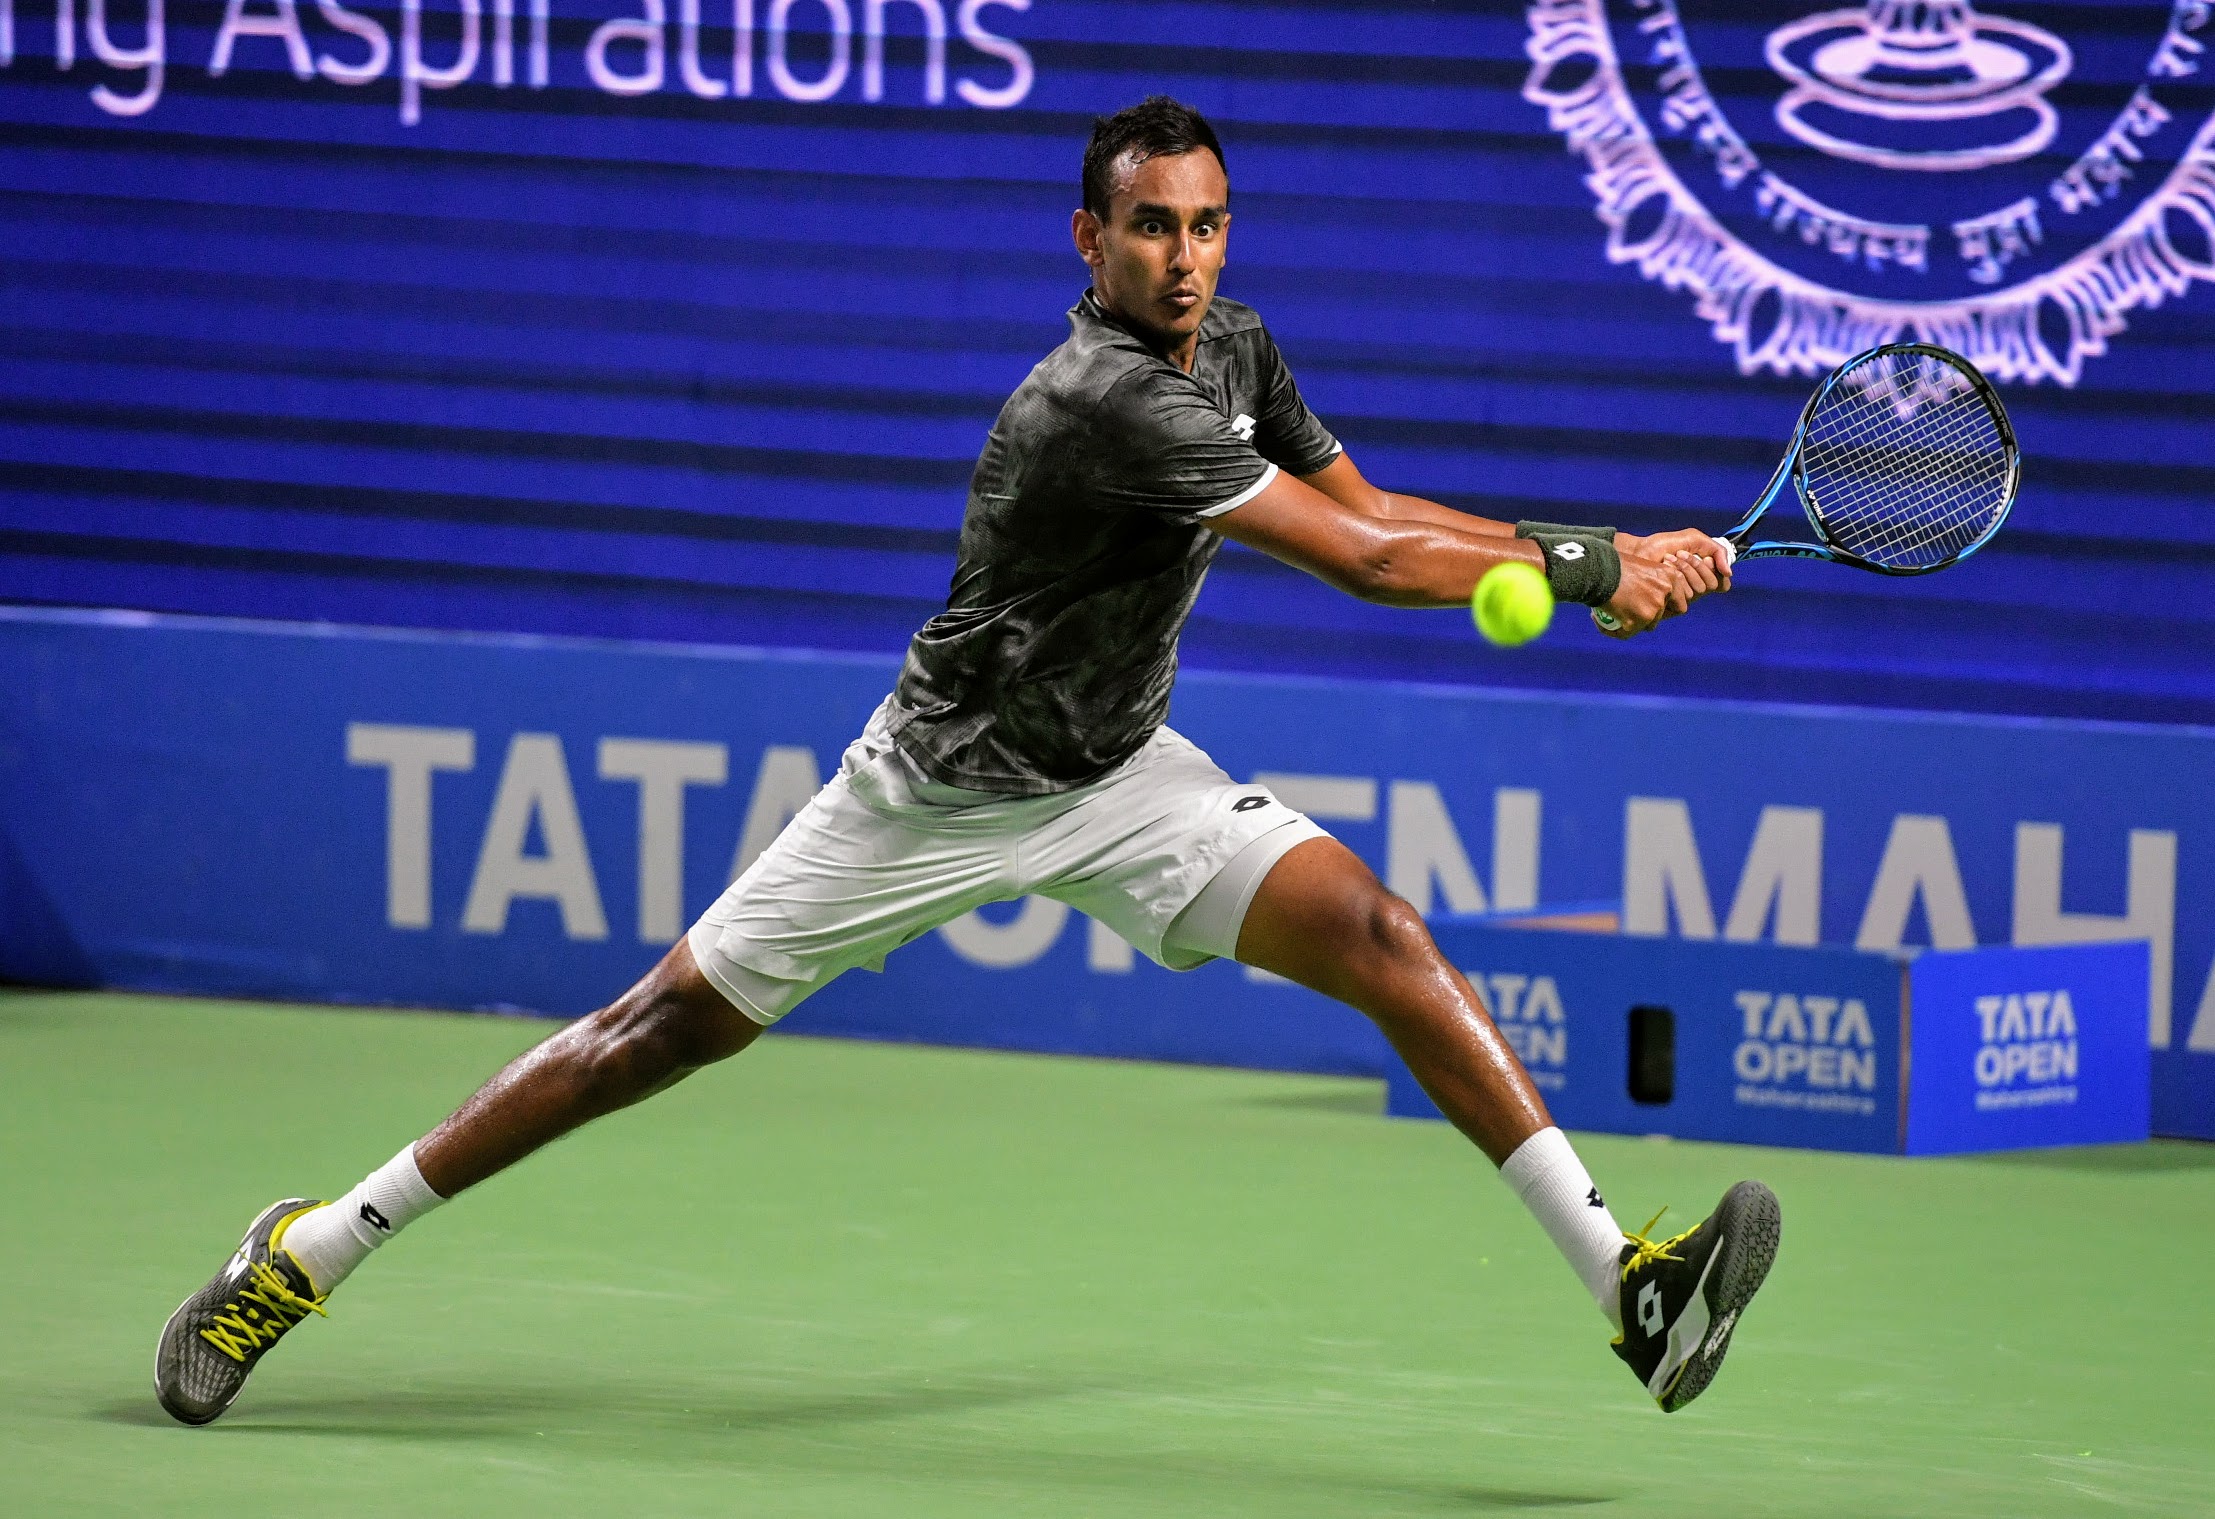 “Making a main draw debut in Pune is very special for me” – Mukund Sasikumar